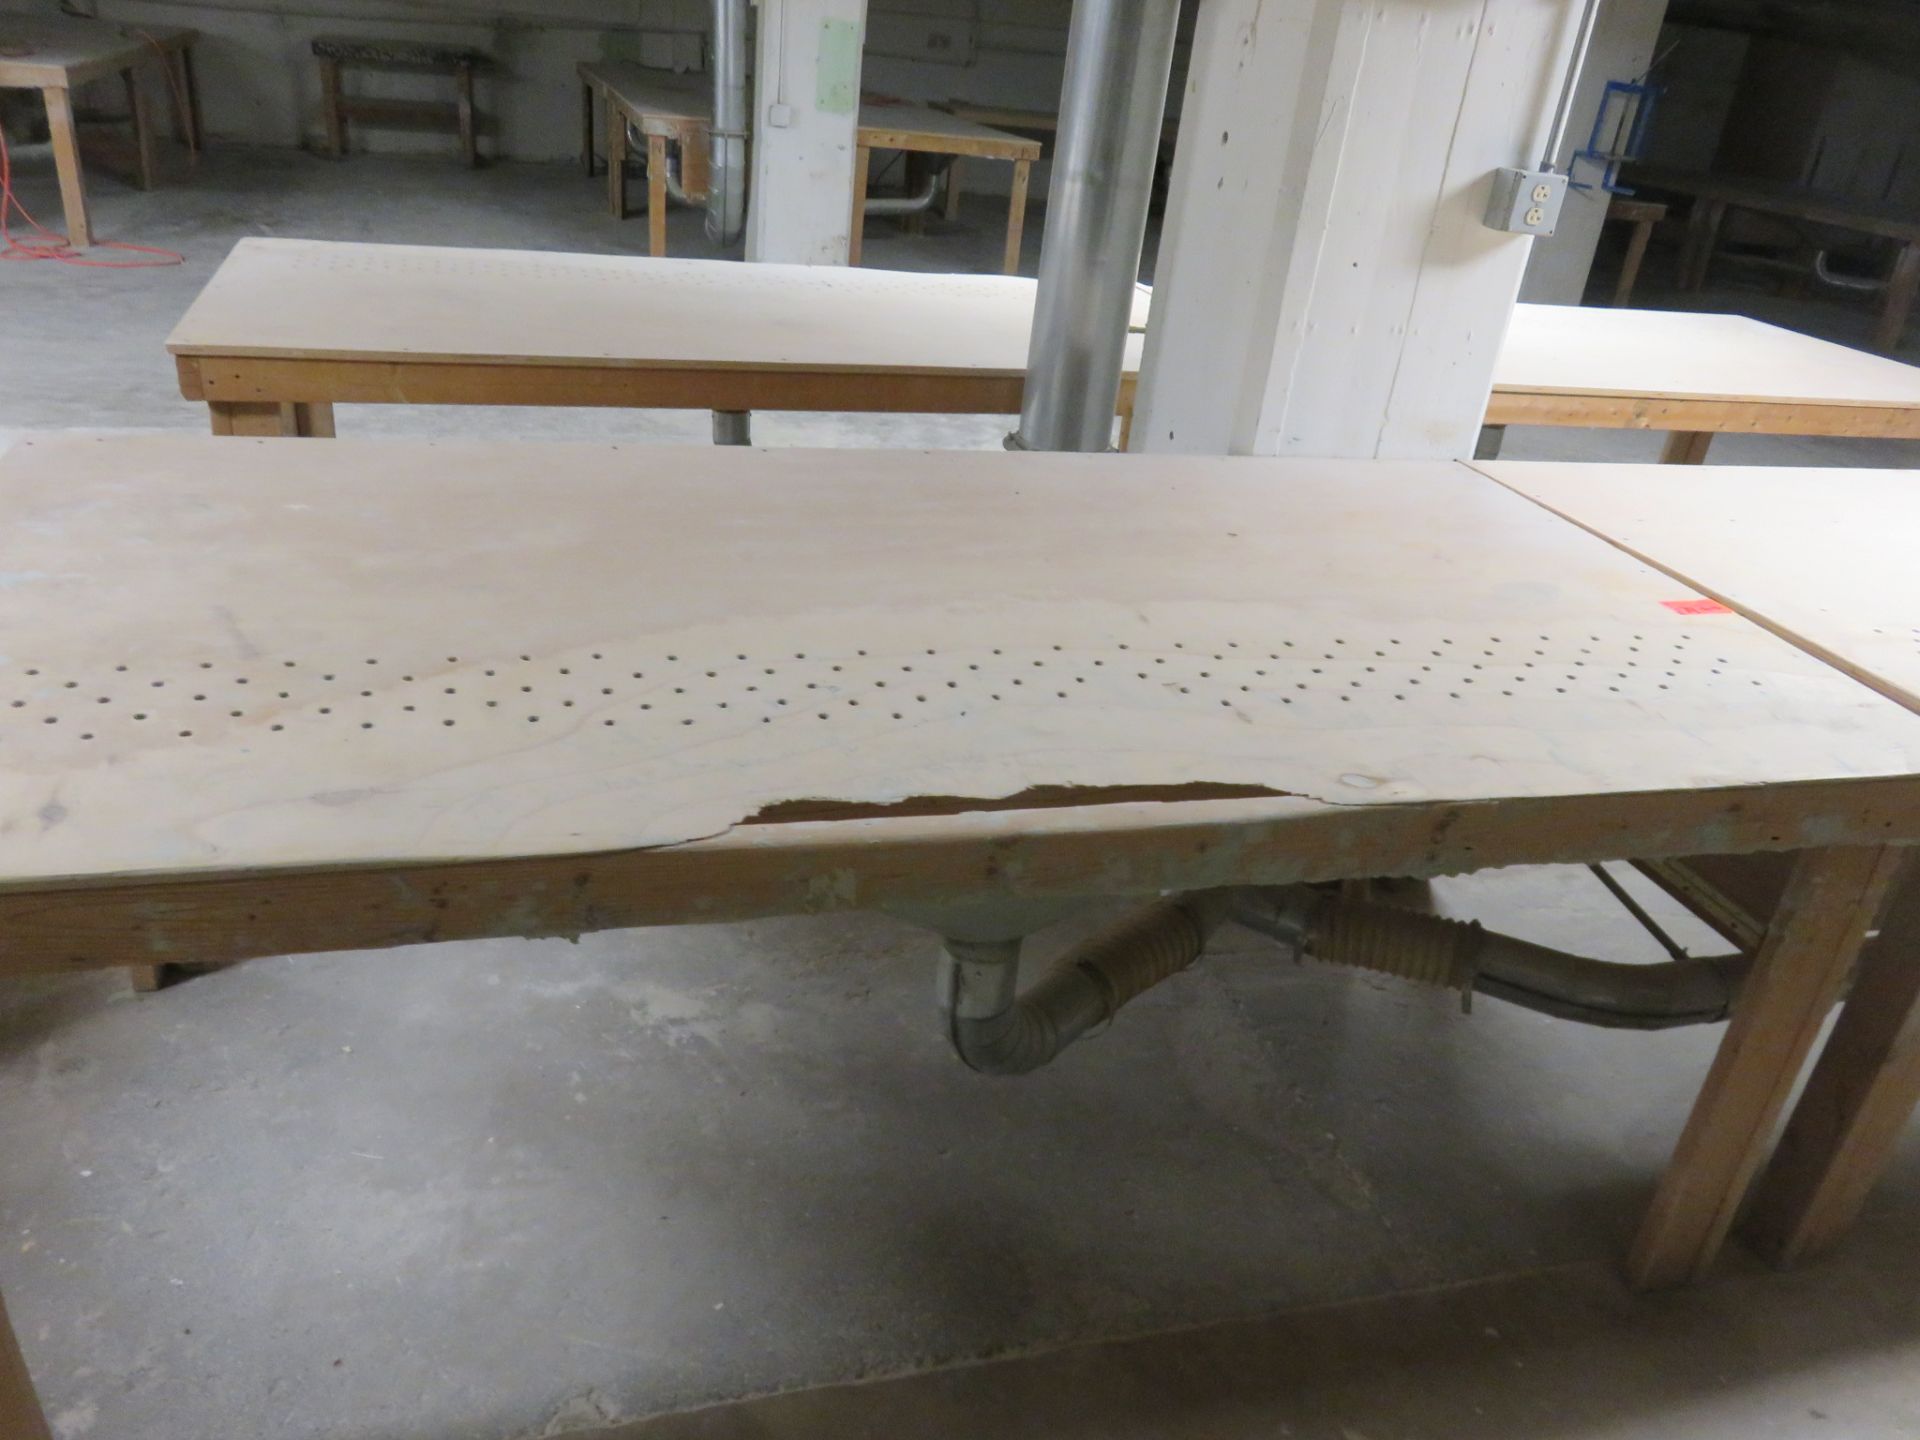 Vacuum Tables Lot of 2 4' x 8' - Image 3 of 3